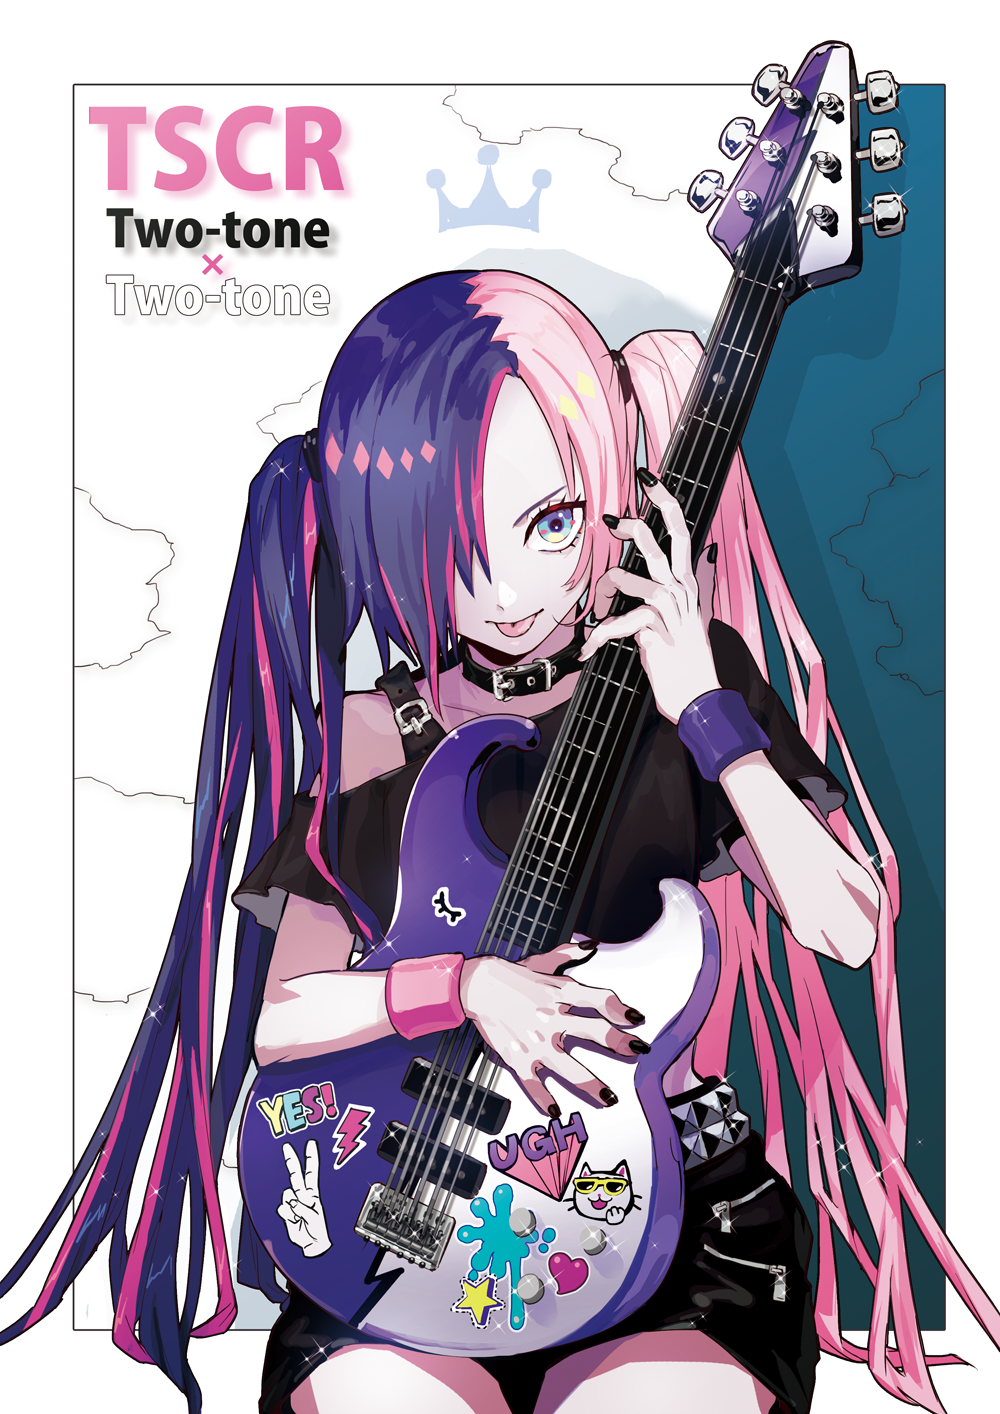 Anime 1000x1414 anime girls anime original characters guitar TSCR artwork multi-colored hair twintails tongue out goths alternative subculture